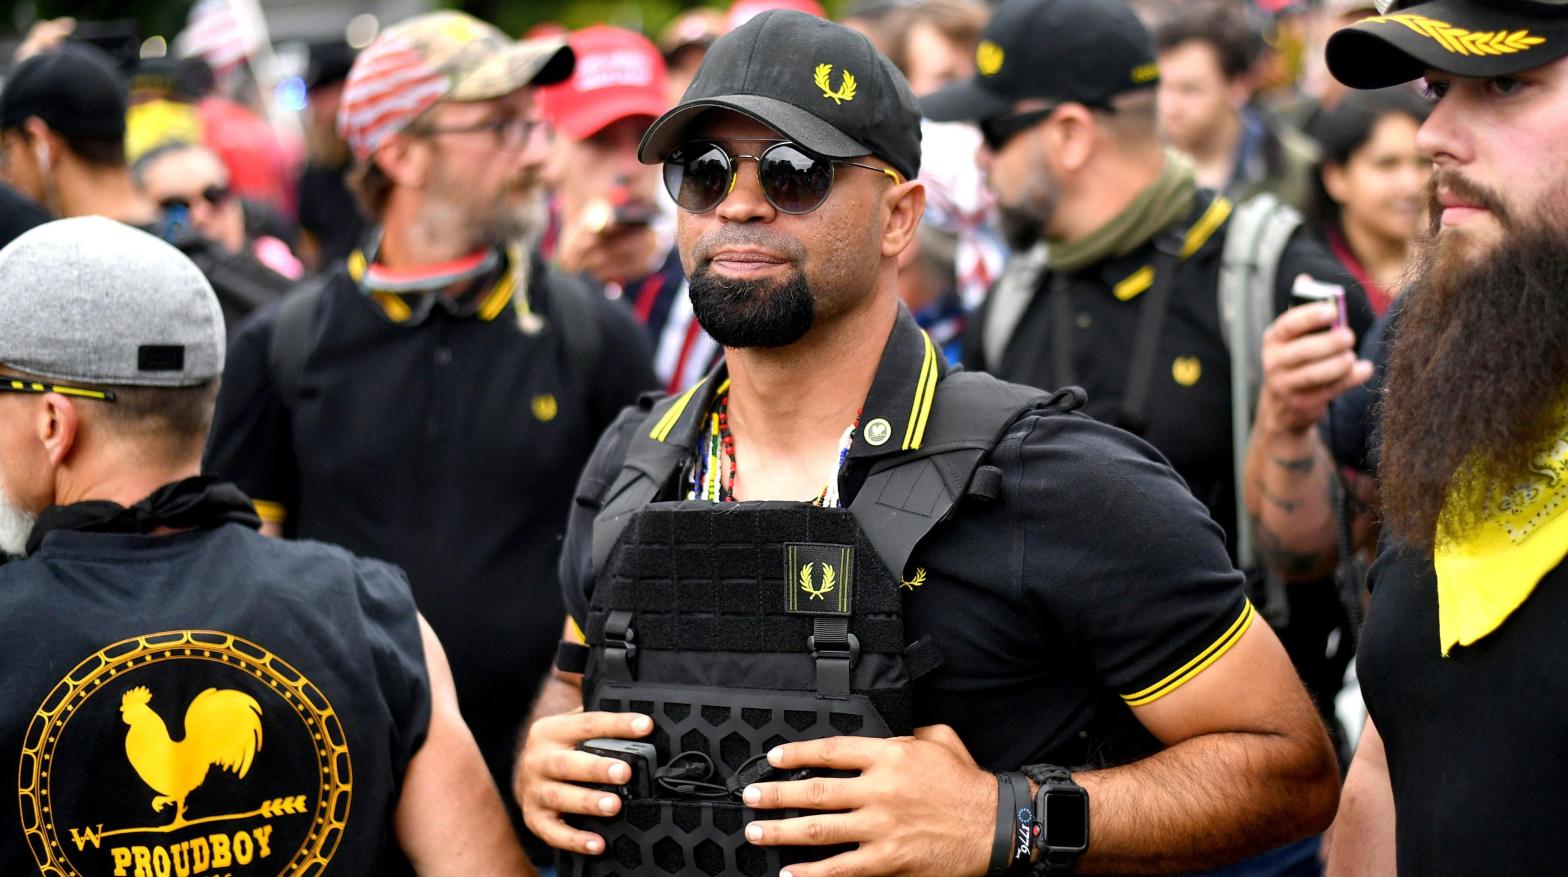 Then-Proud Boys leader Enrique Tarrio at a rally in Portland, Oregon in August 2019. (Photo: Noah Berger, File, Getty Images)